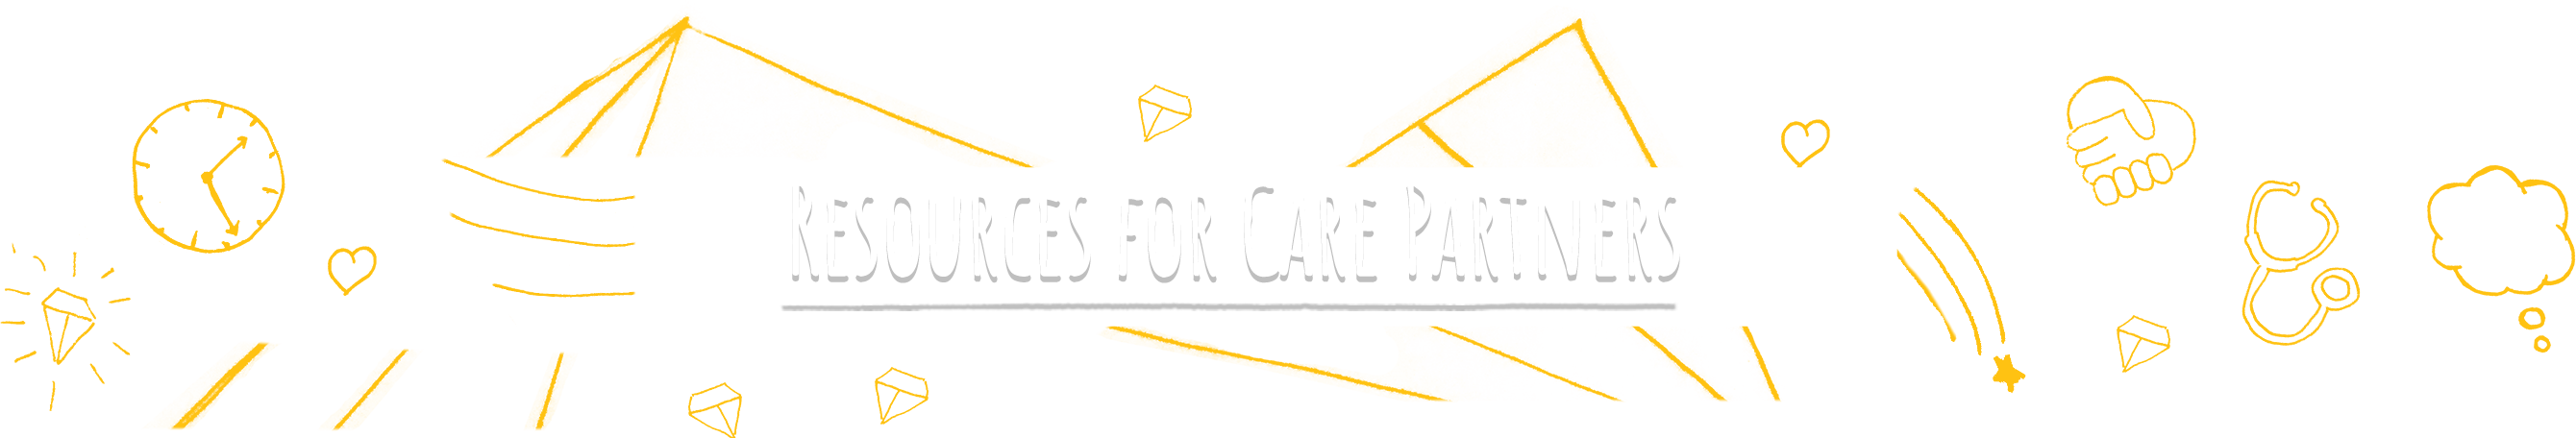 Resources for Care Partners